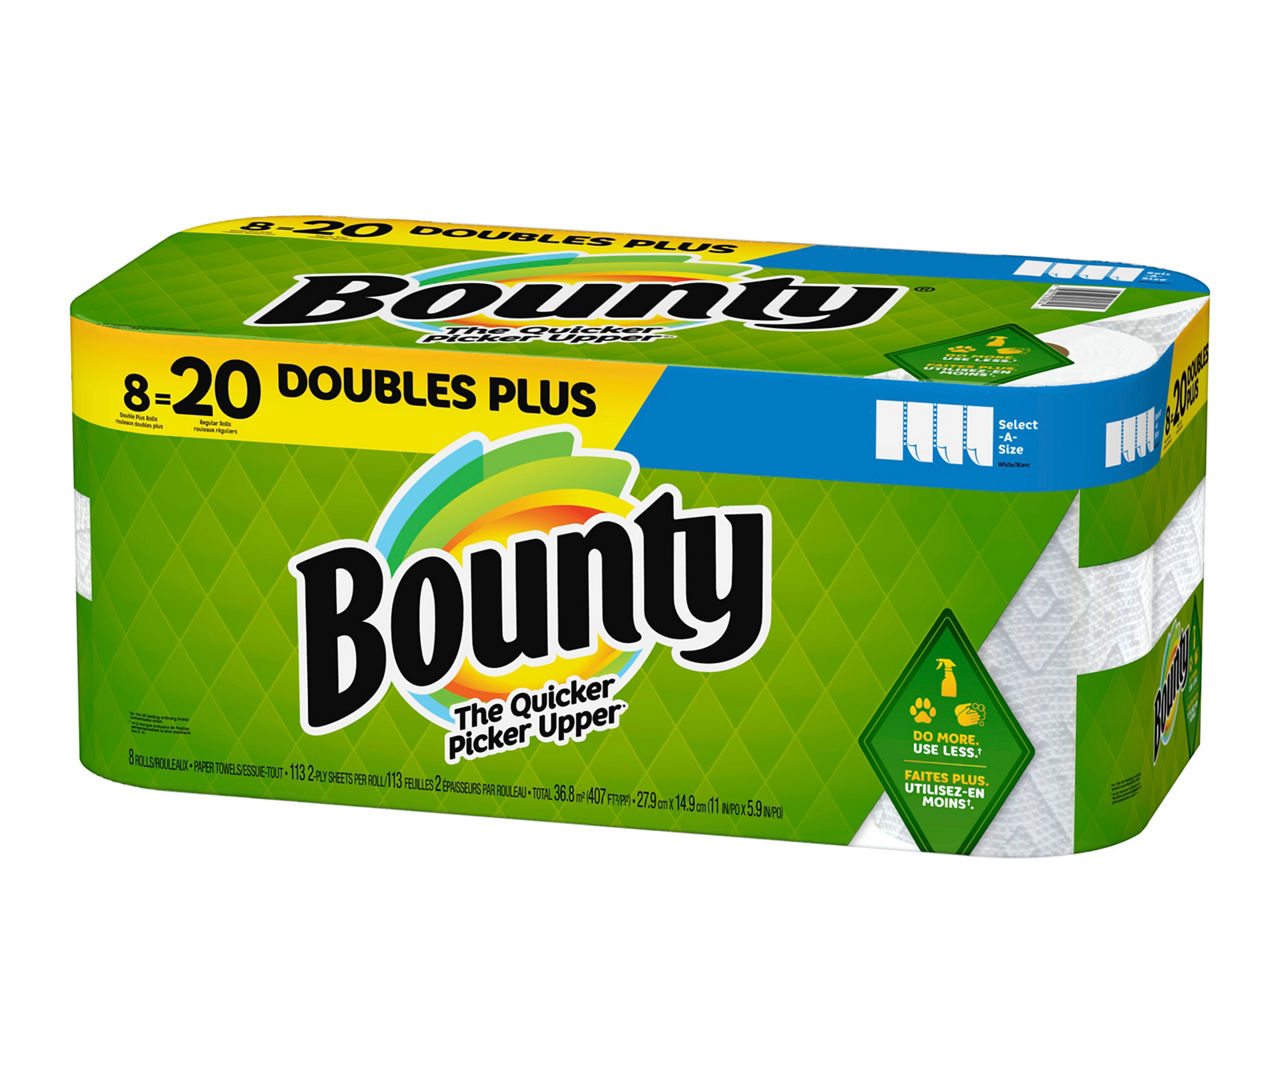 Bounty Quick-Size Paper Towels, White, 12 Family Rolls = 30